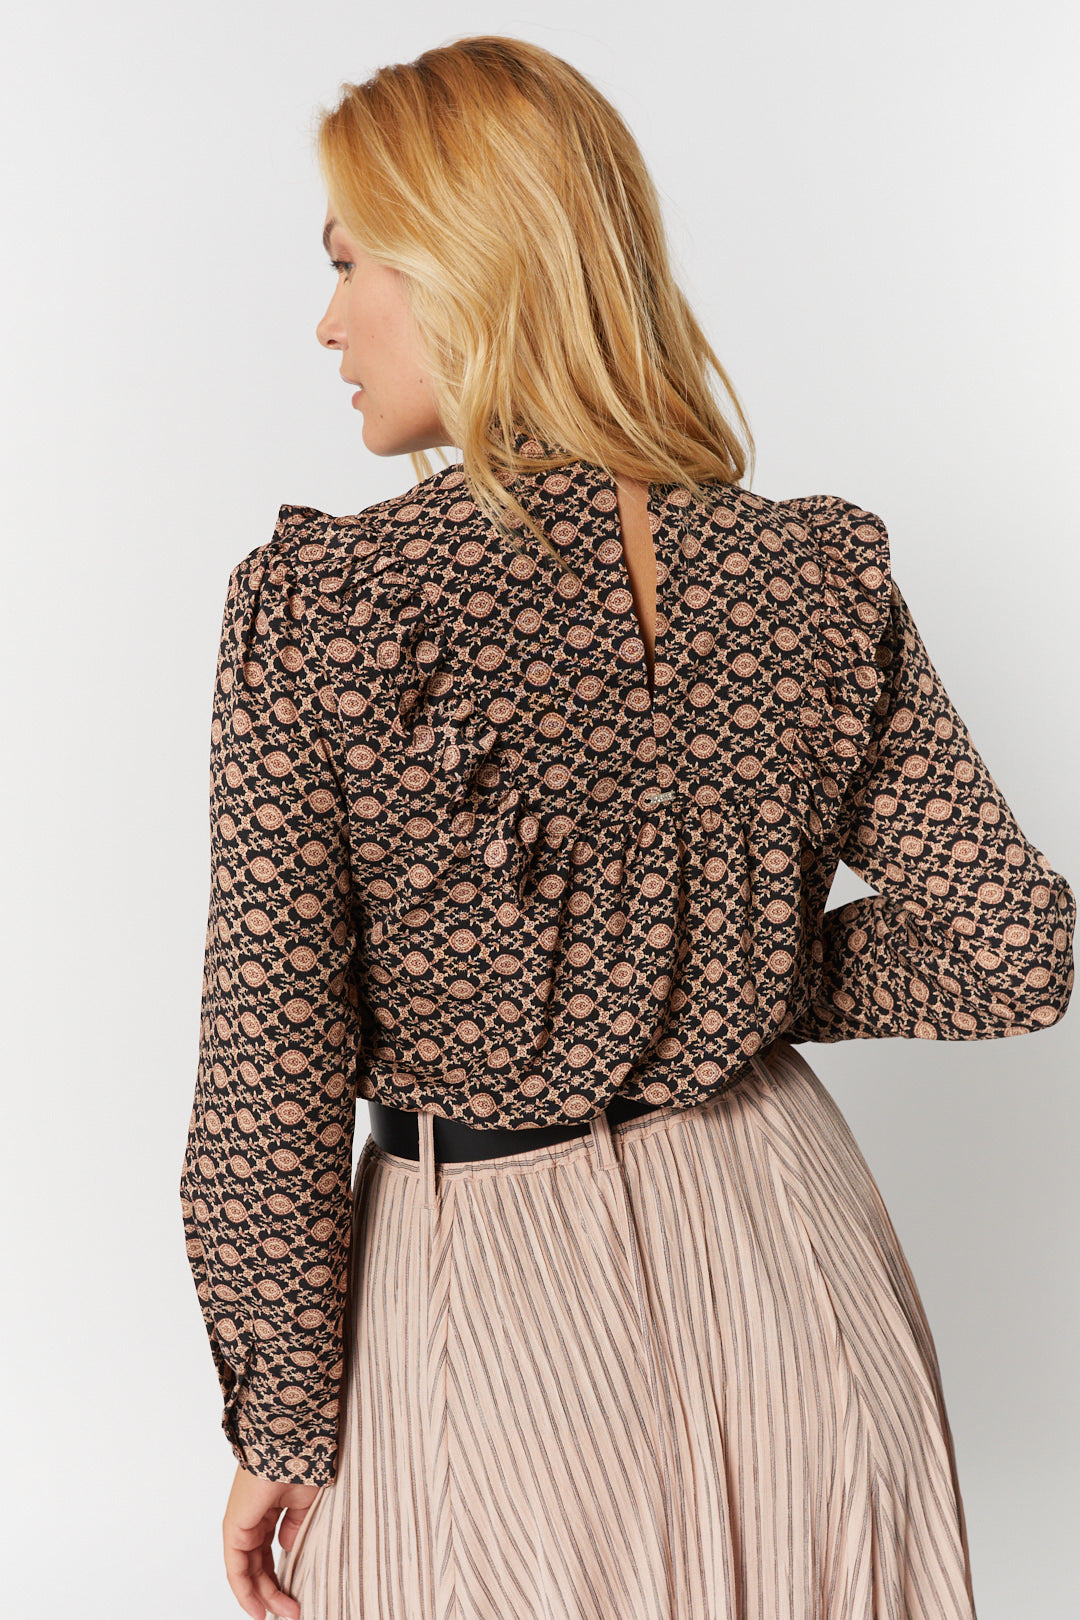 Black blouse with patterns and ruffles | Geraldine